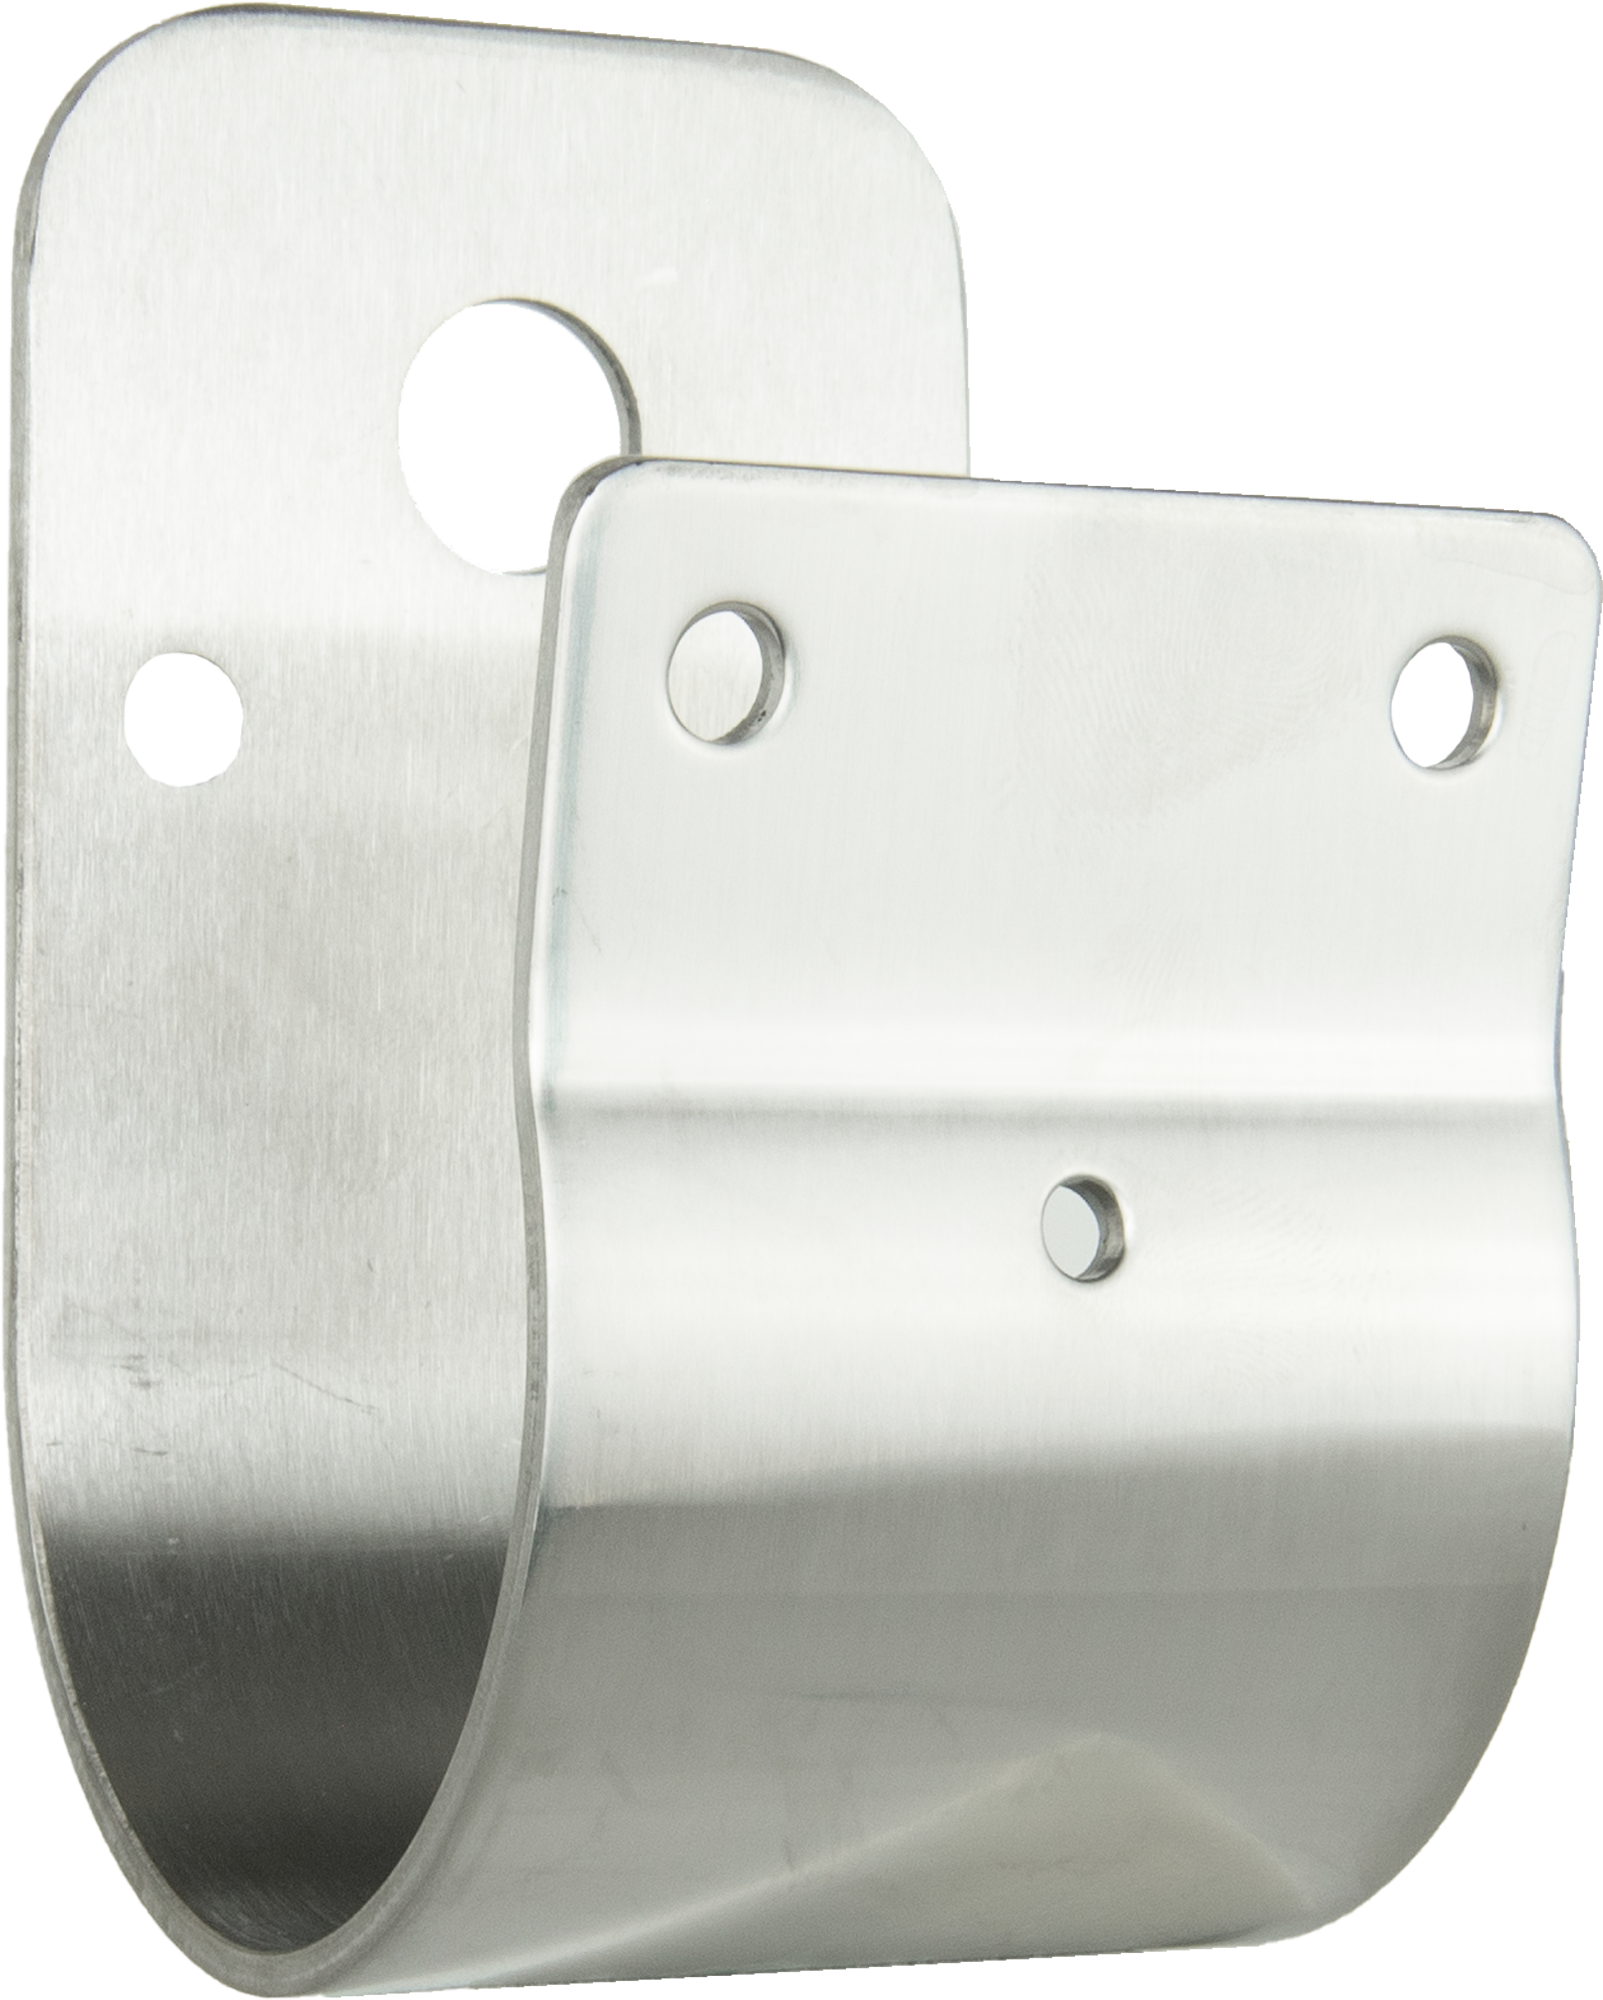 GME - 63mm Wrap Around Bull Bar Bracket- Stainless Steel - Default Title